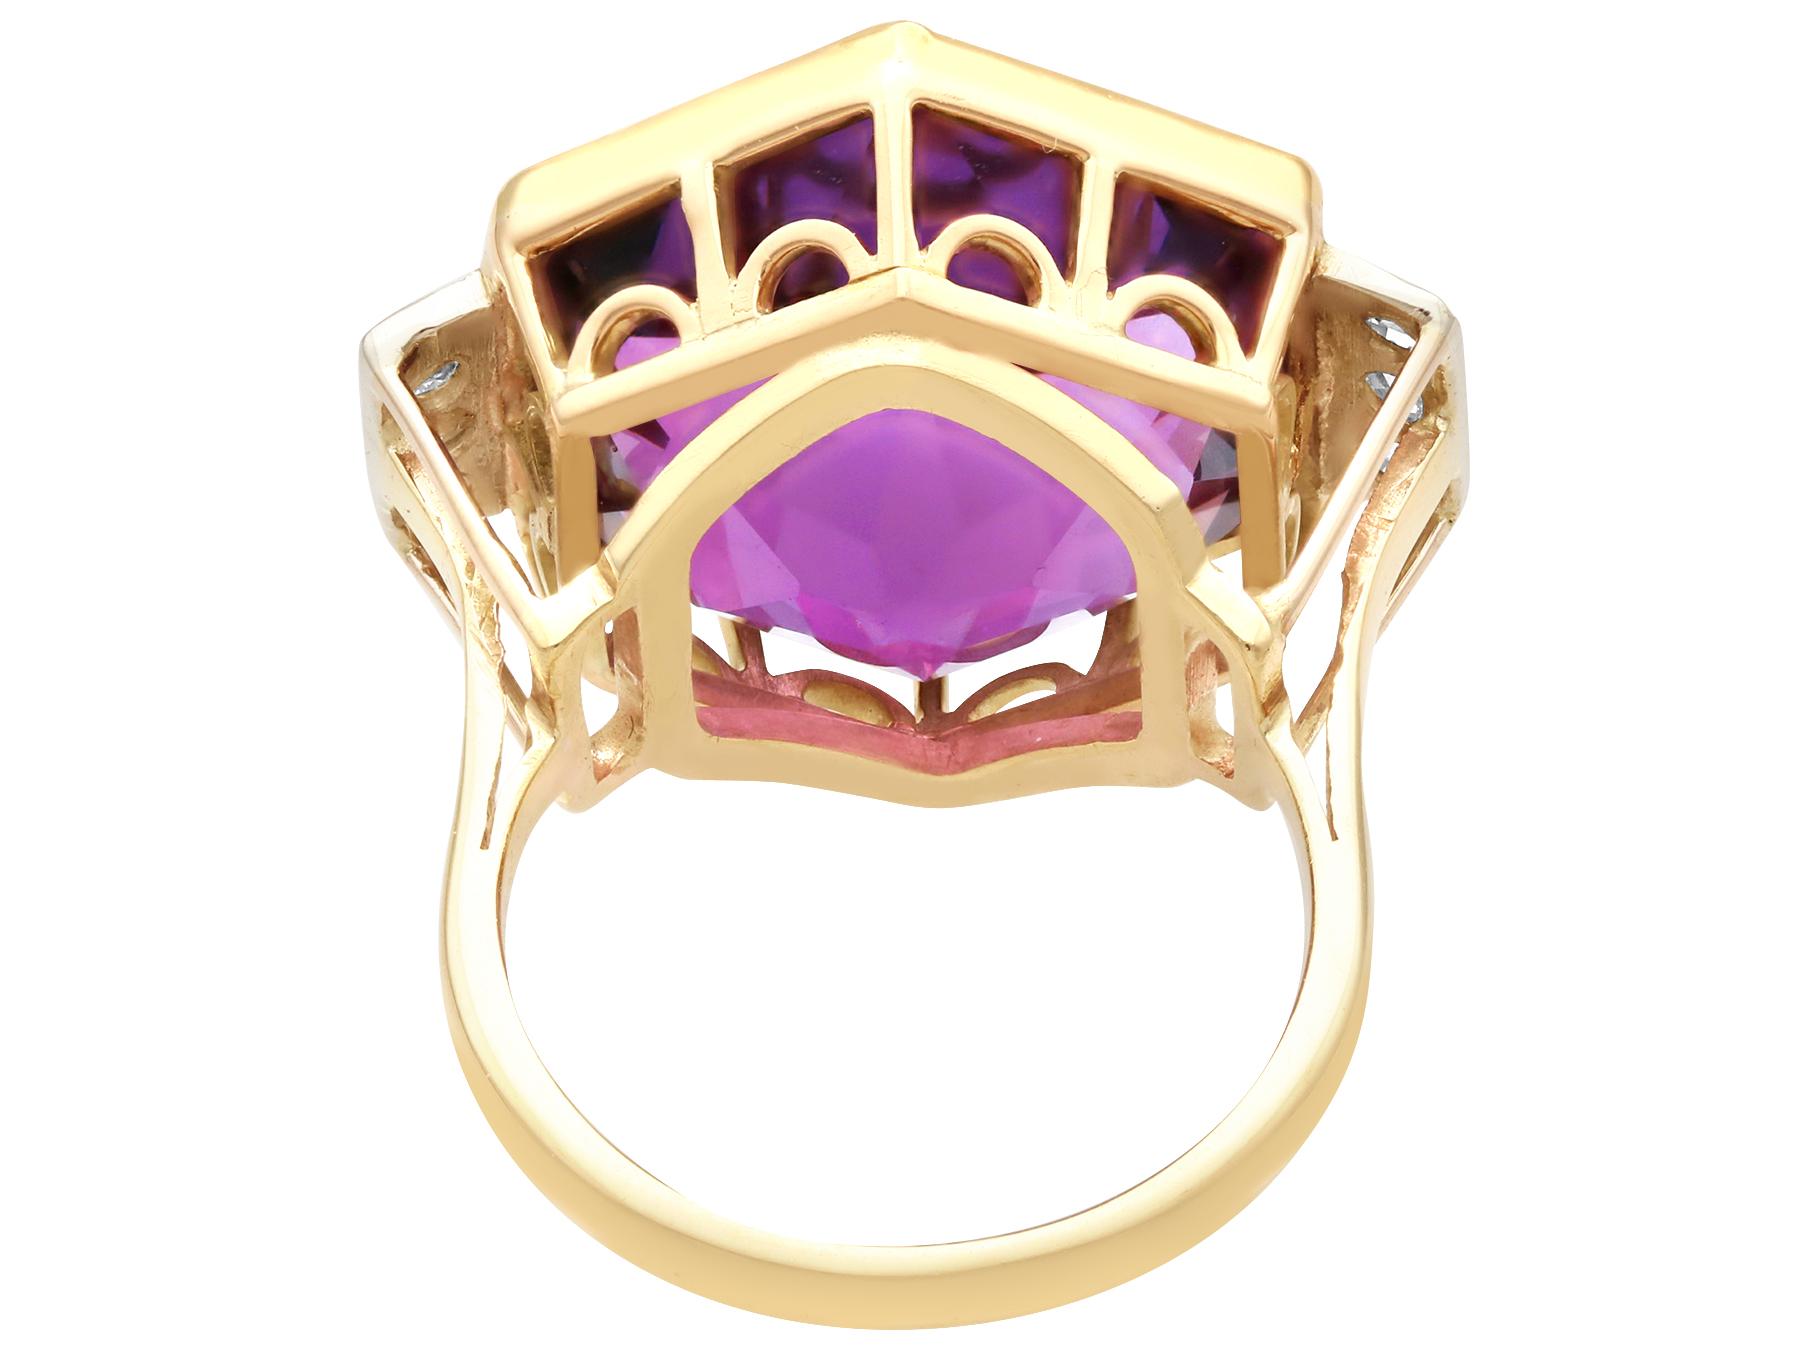 Vintage 1950s 19.84ct Amethyst and 0.24ct Diamond, 9k Yellow Gold Dress Ring In Excellent Condition For Sale In Jesmond, Newcastle Upon Tyne